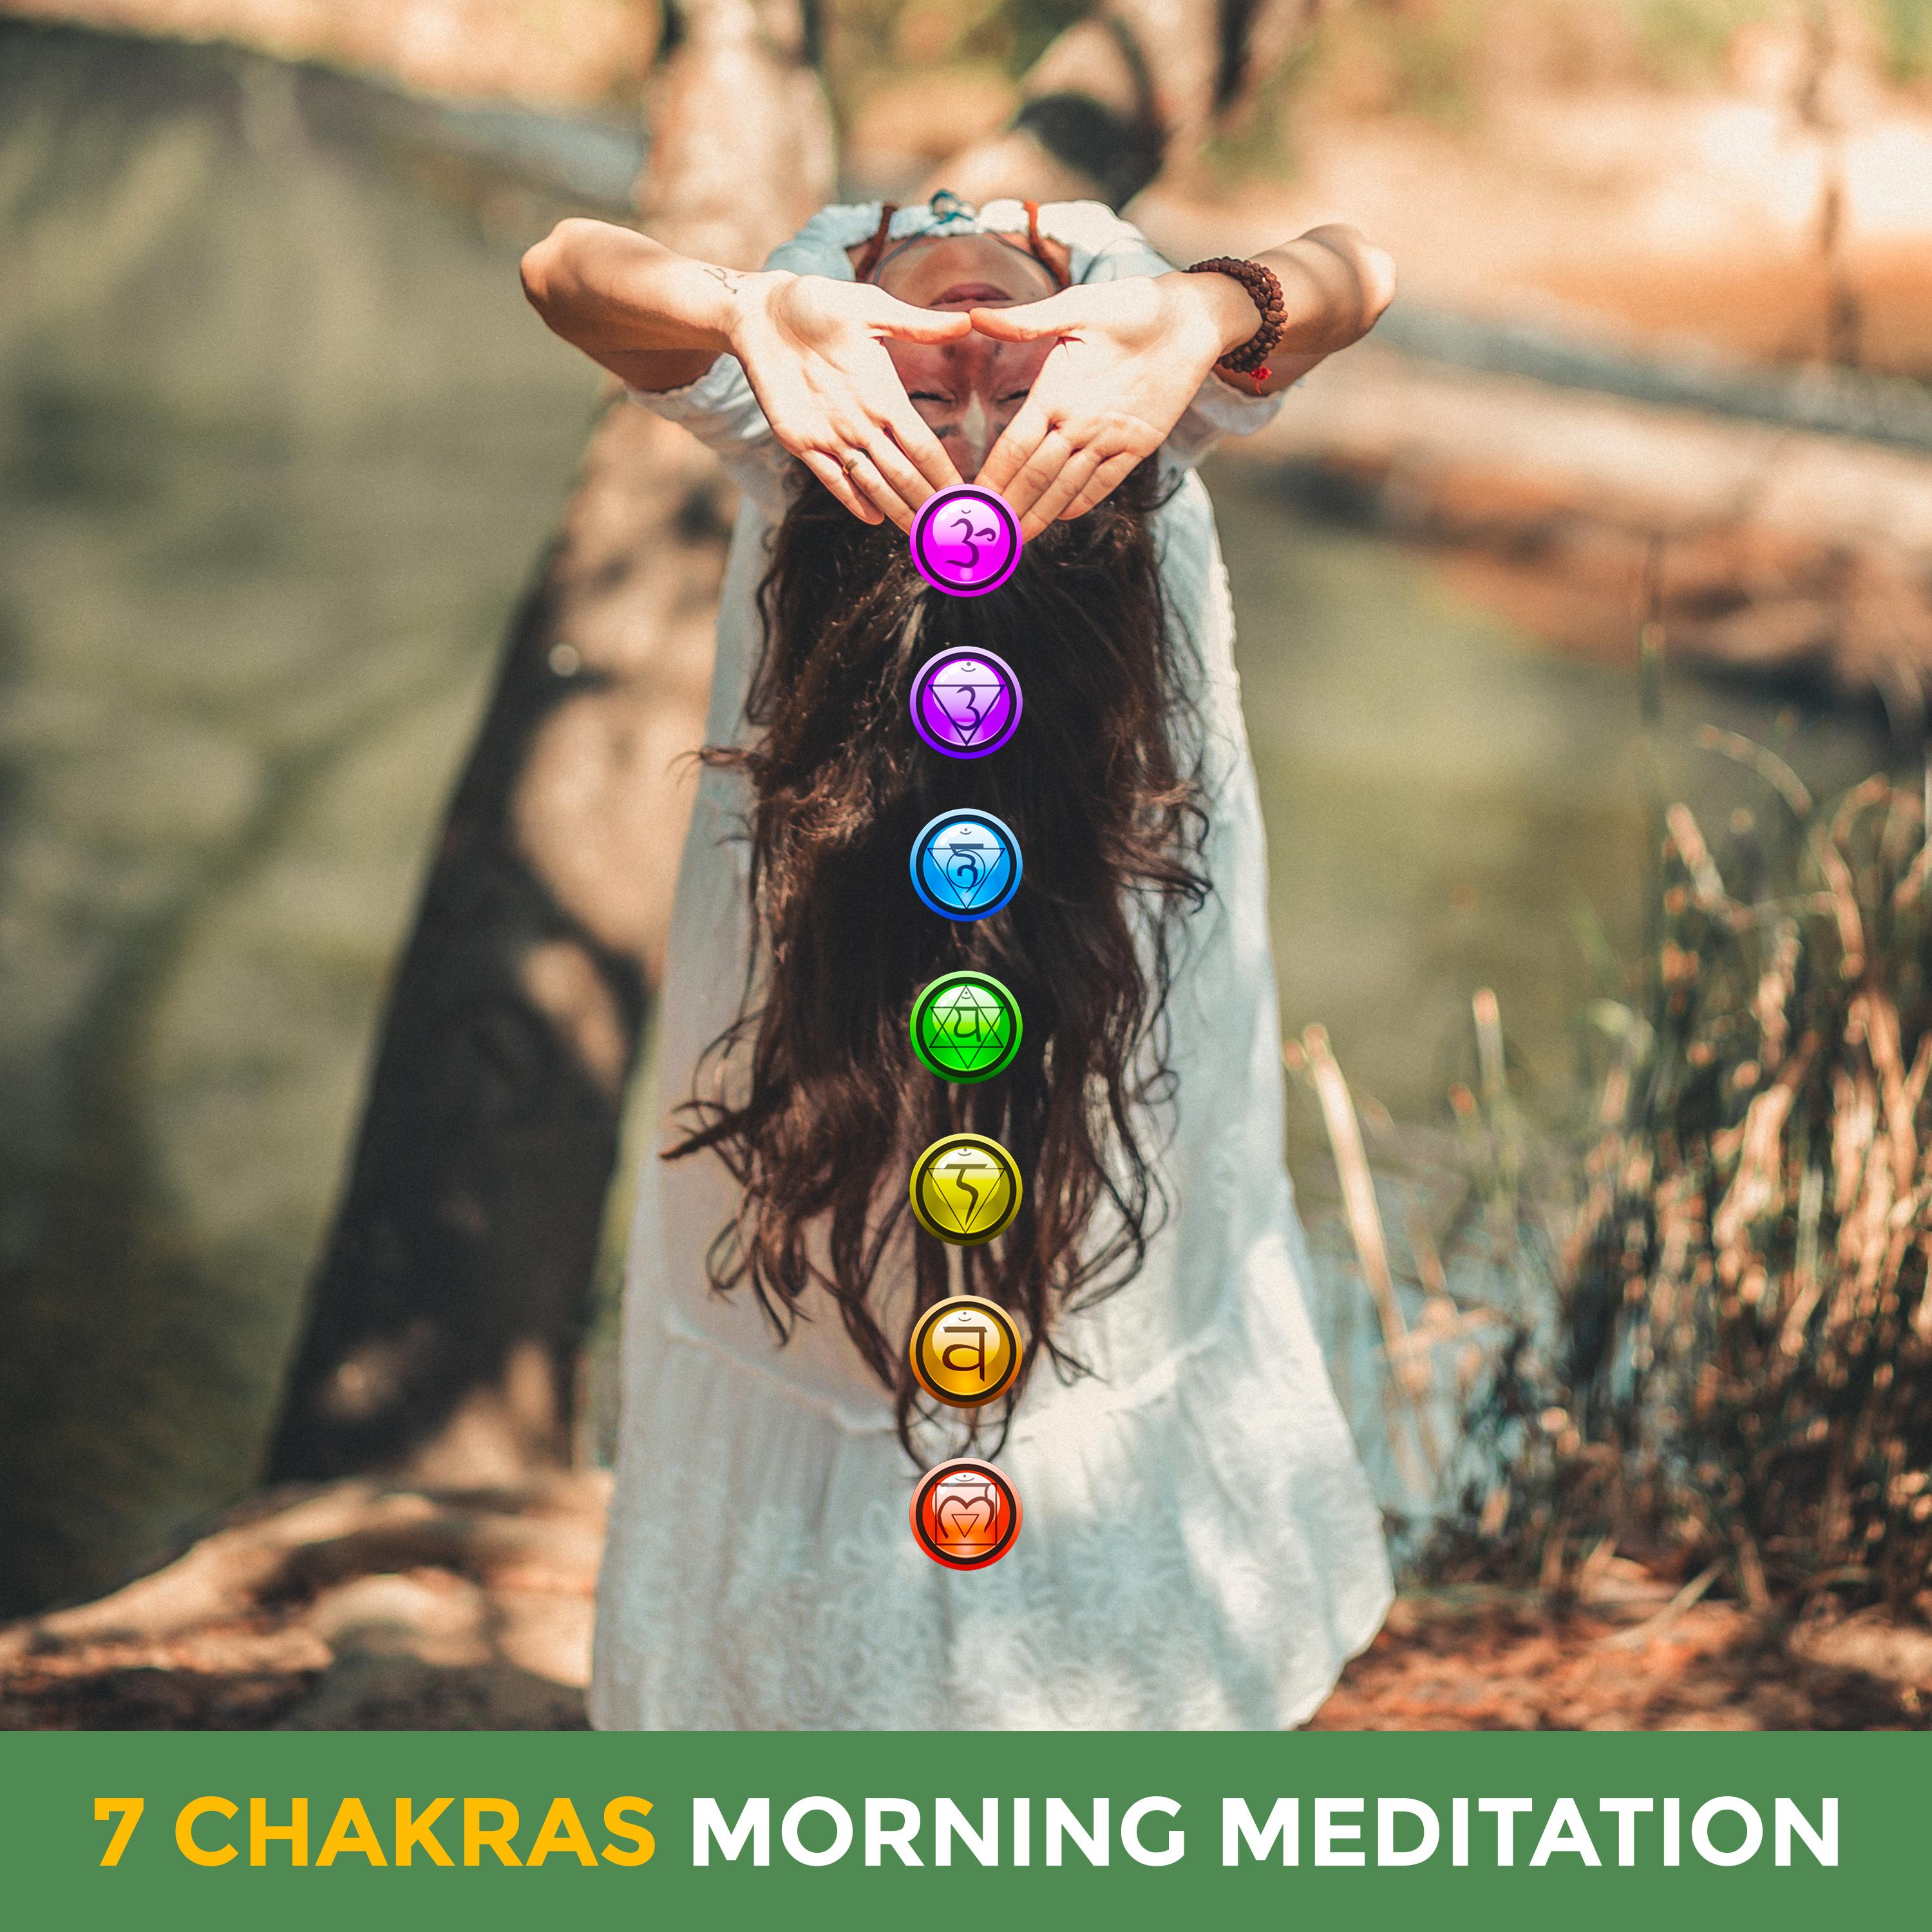 7 Chakras Morning Meditation: New Age 2019 Music Compilation for Early Yoga Training, Increase Your Inner Energy for All Day, Perfect Wake Up Songs